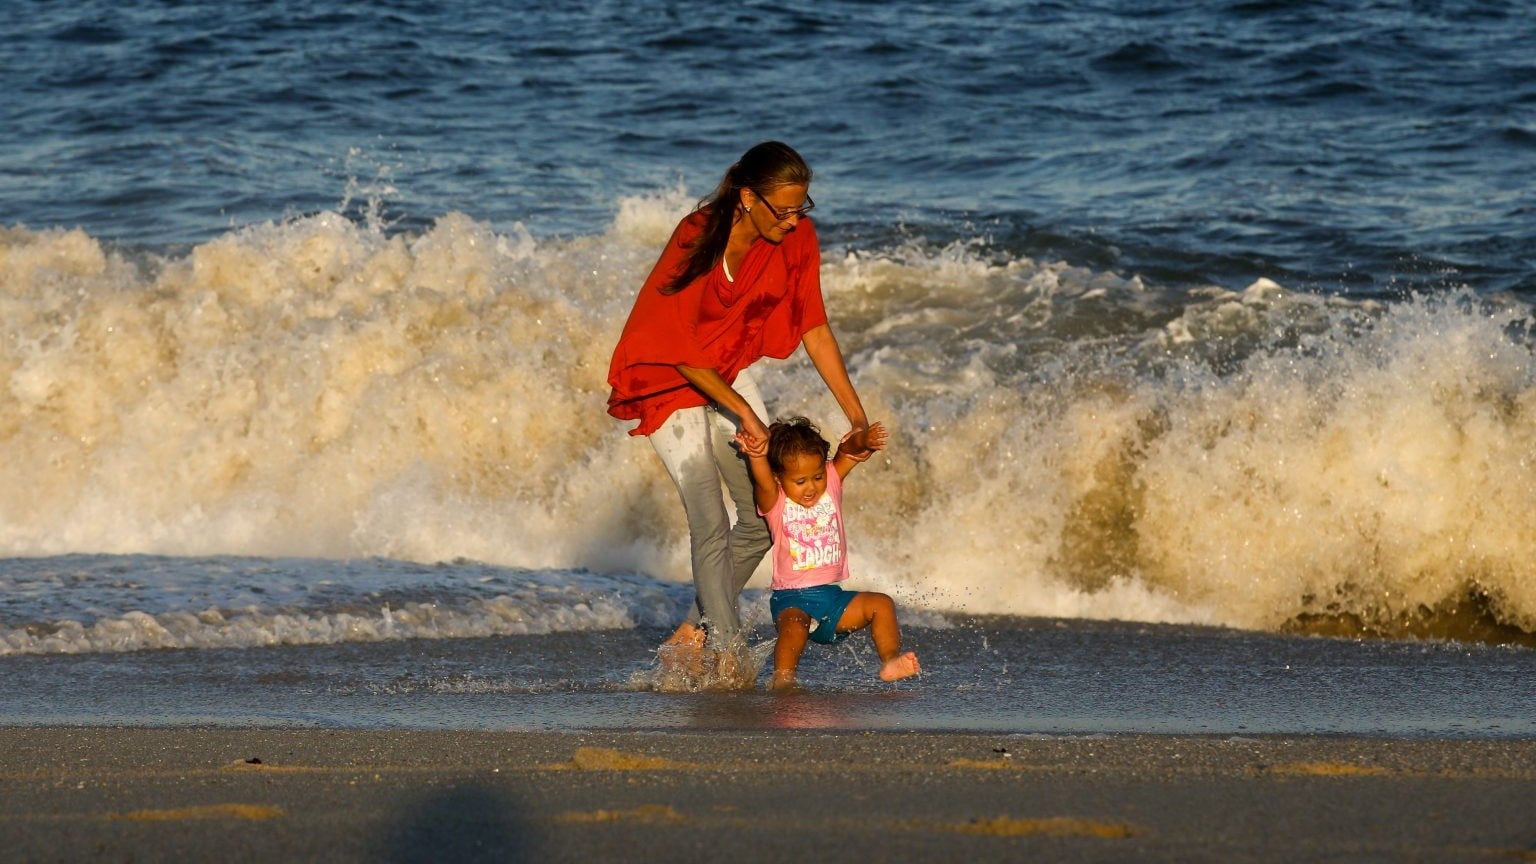 Woman and Child on Beach